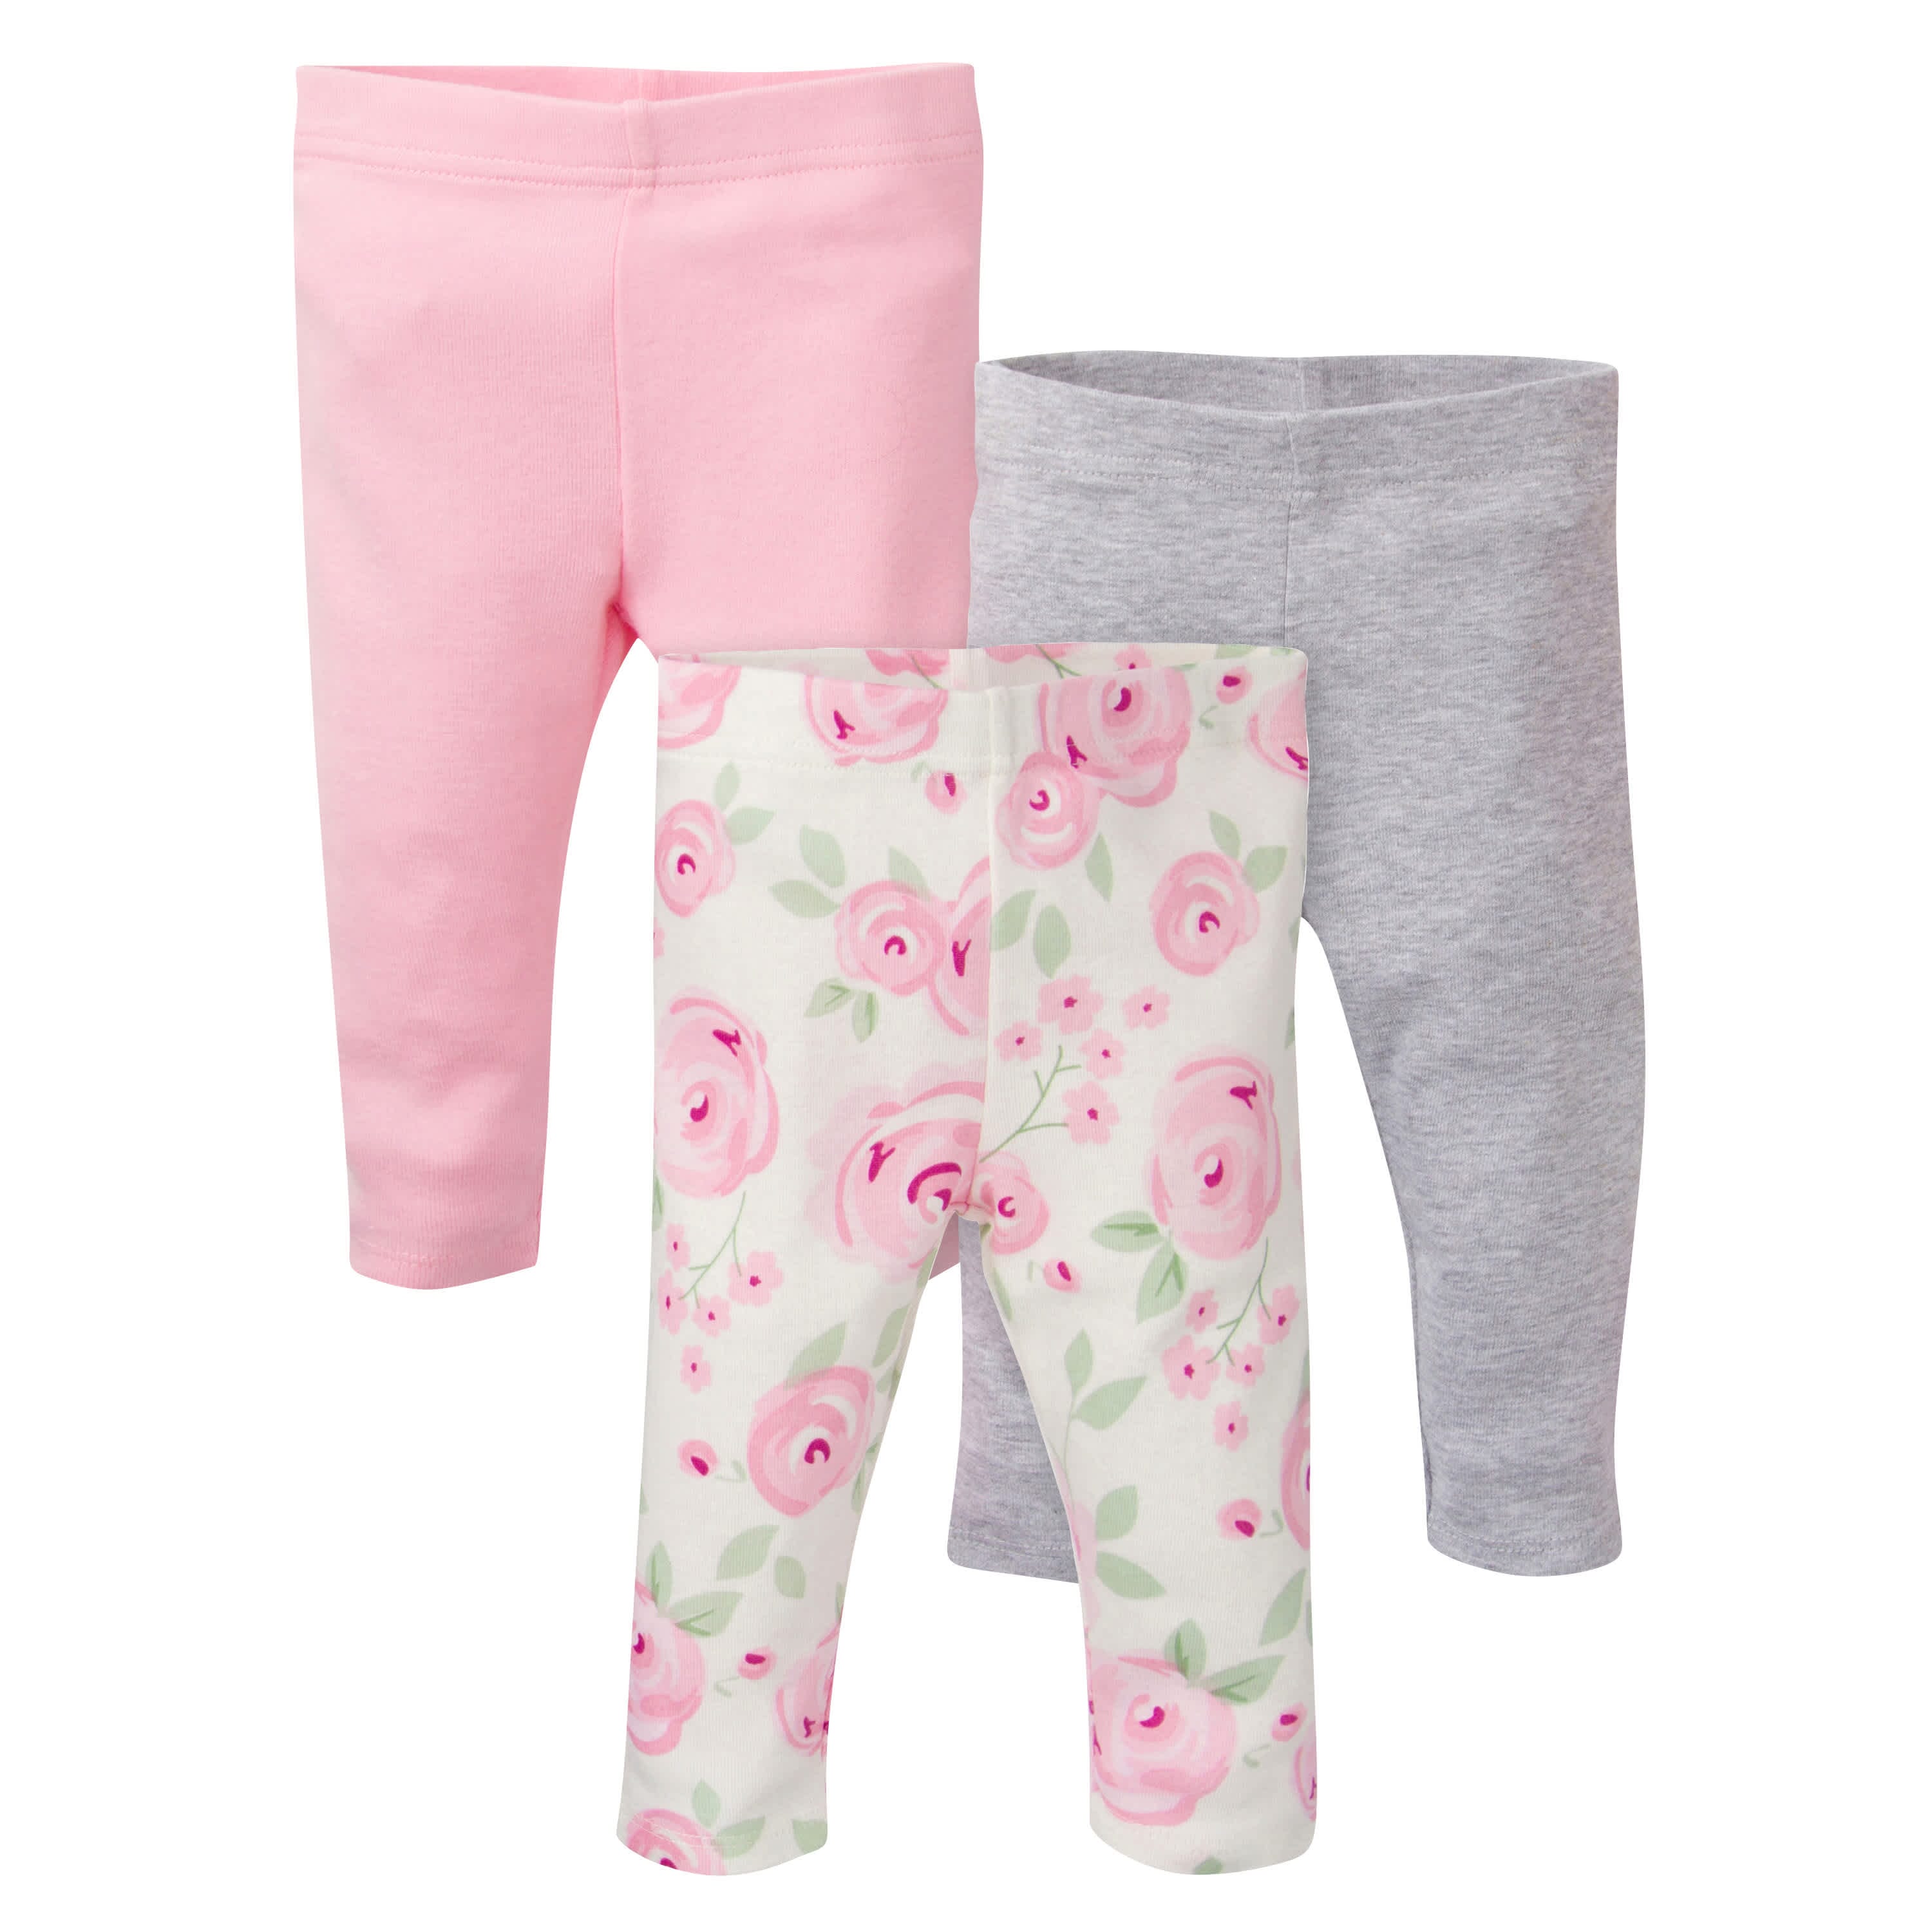 Buy Luvable Friends Baby Girls' Leggings, 3 Pack, Pink Rose, 18-24 Months  at Amazon.in